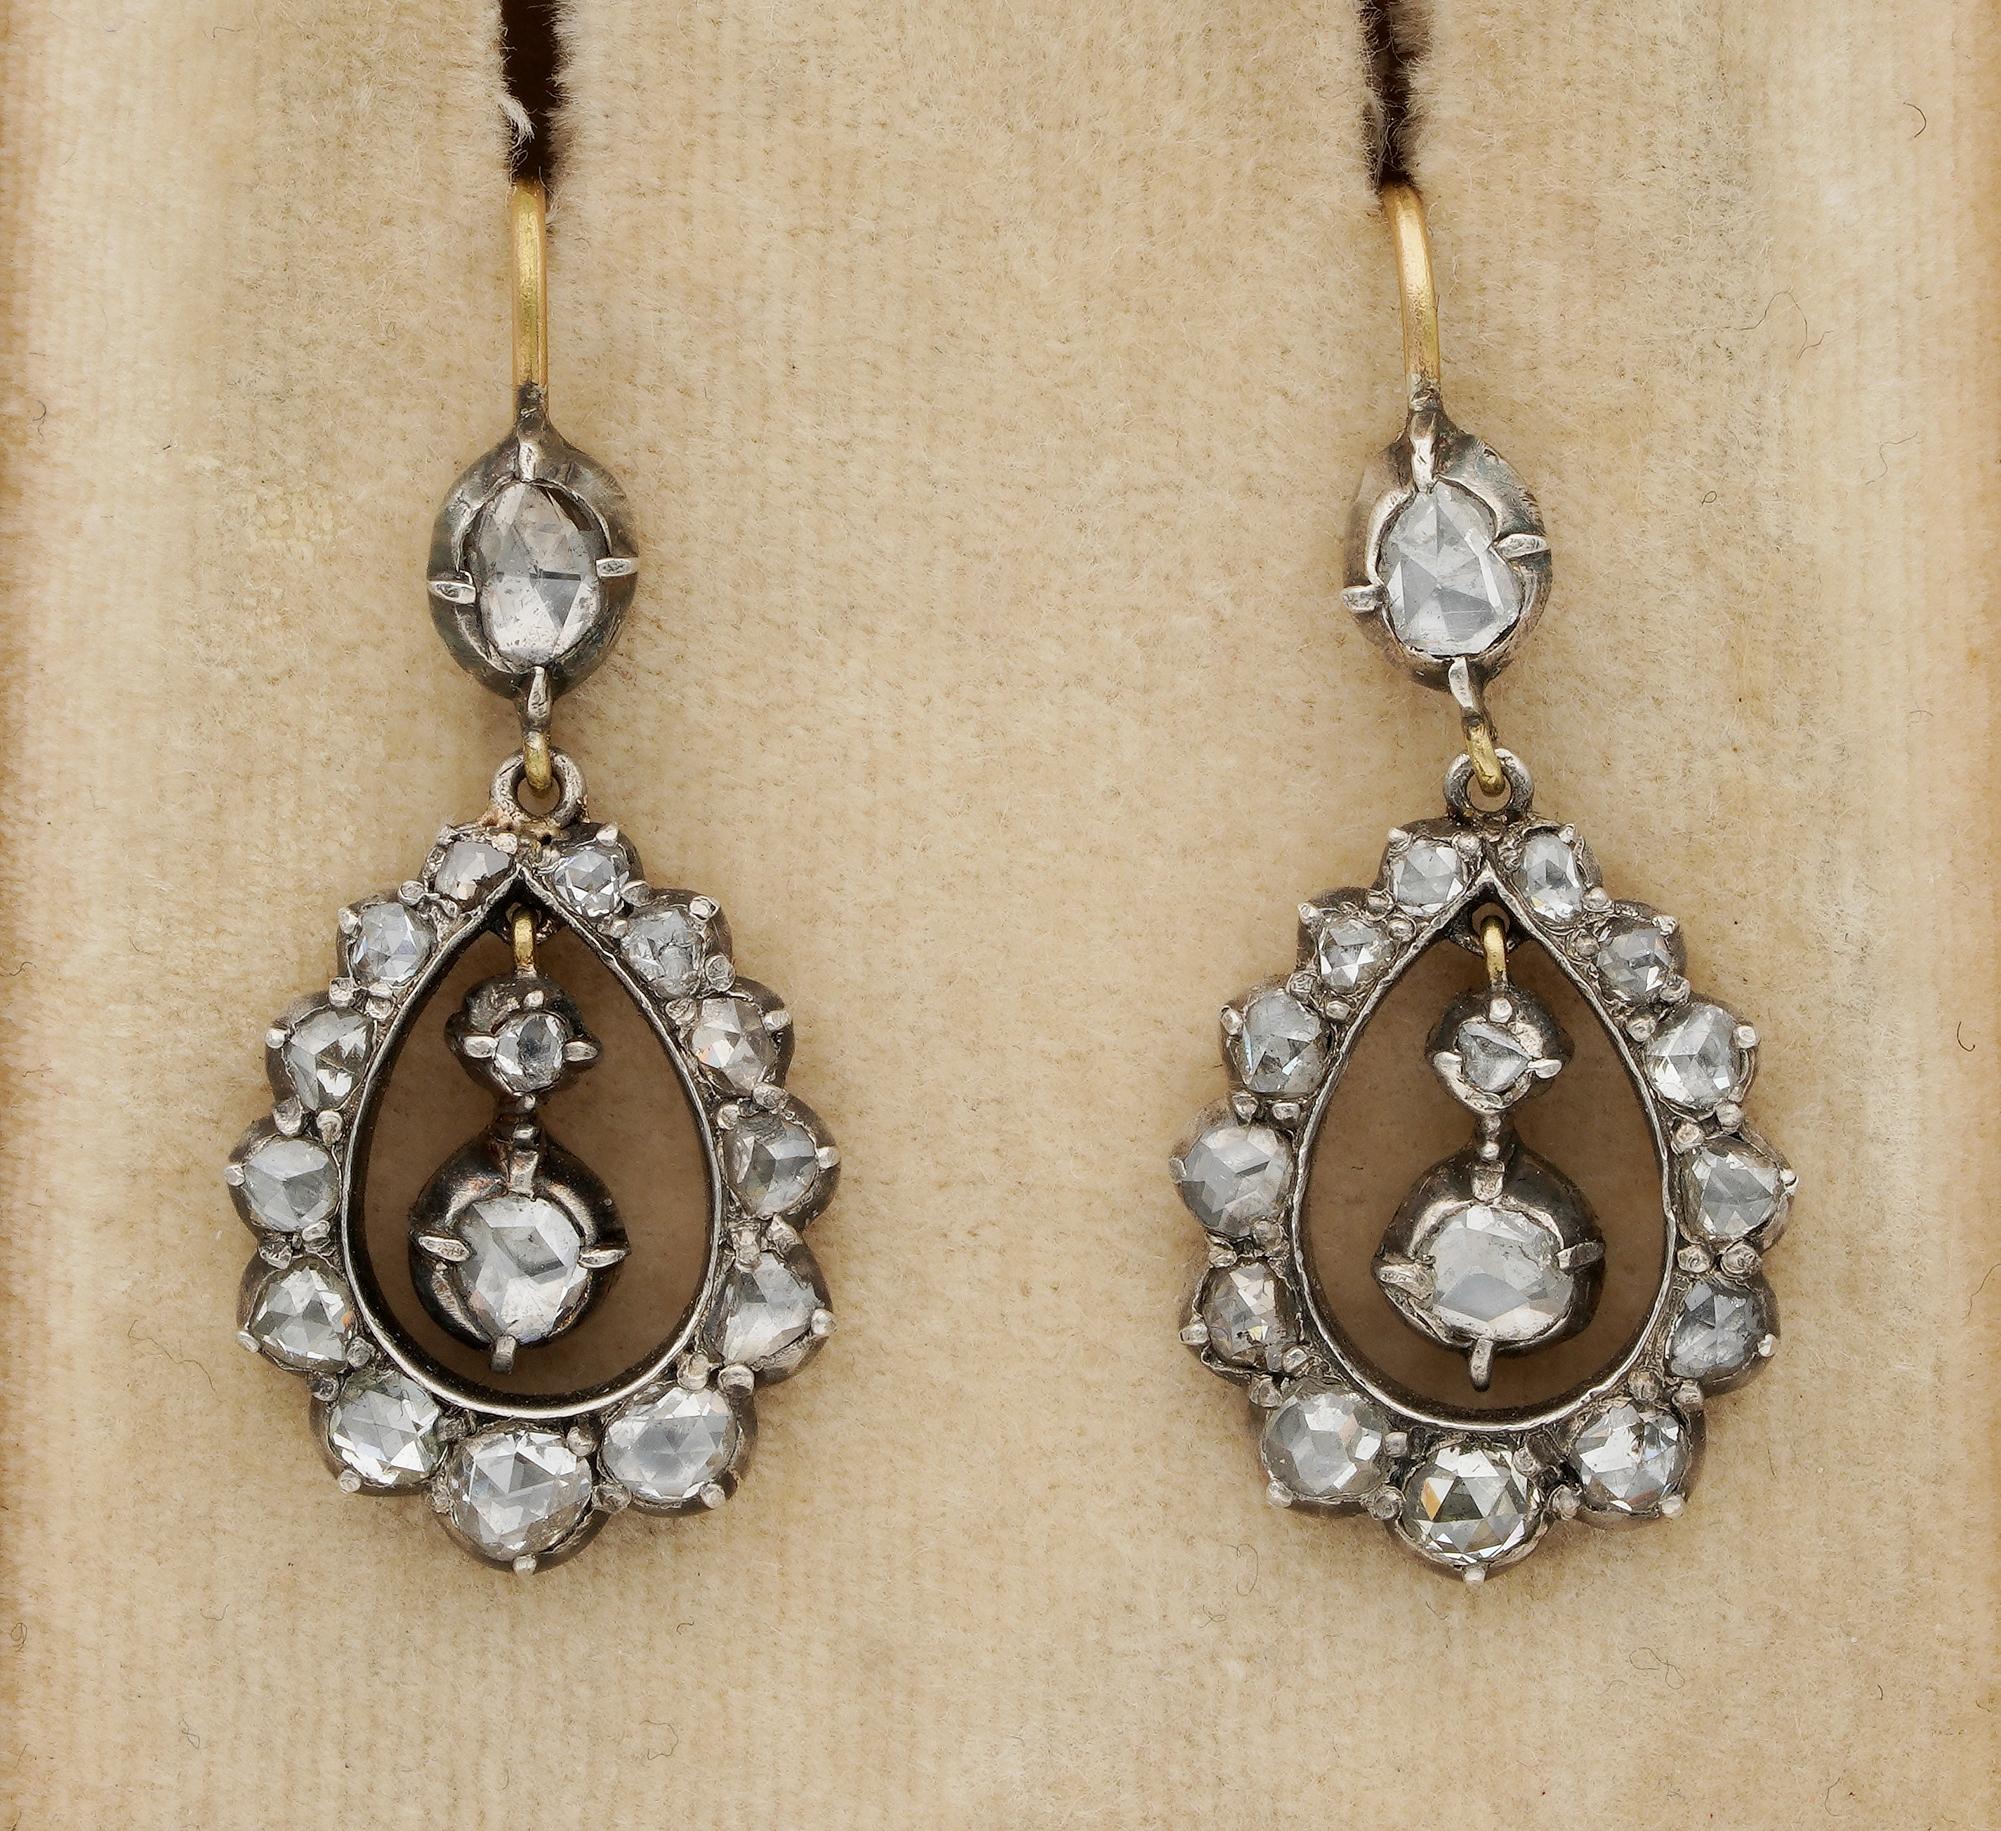 Beautiful Georgian period Diamond drop earrings of lovely design
Close back, hand crafted of solid 15 KT gold topped by silver – tested – 1790/1810 ca
English origin
Articulate to swing on ears attracting and catching the light at any movement
Each